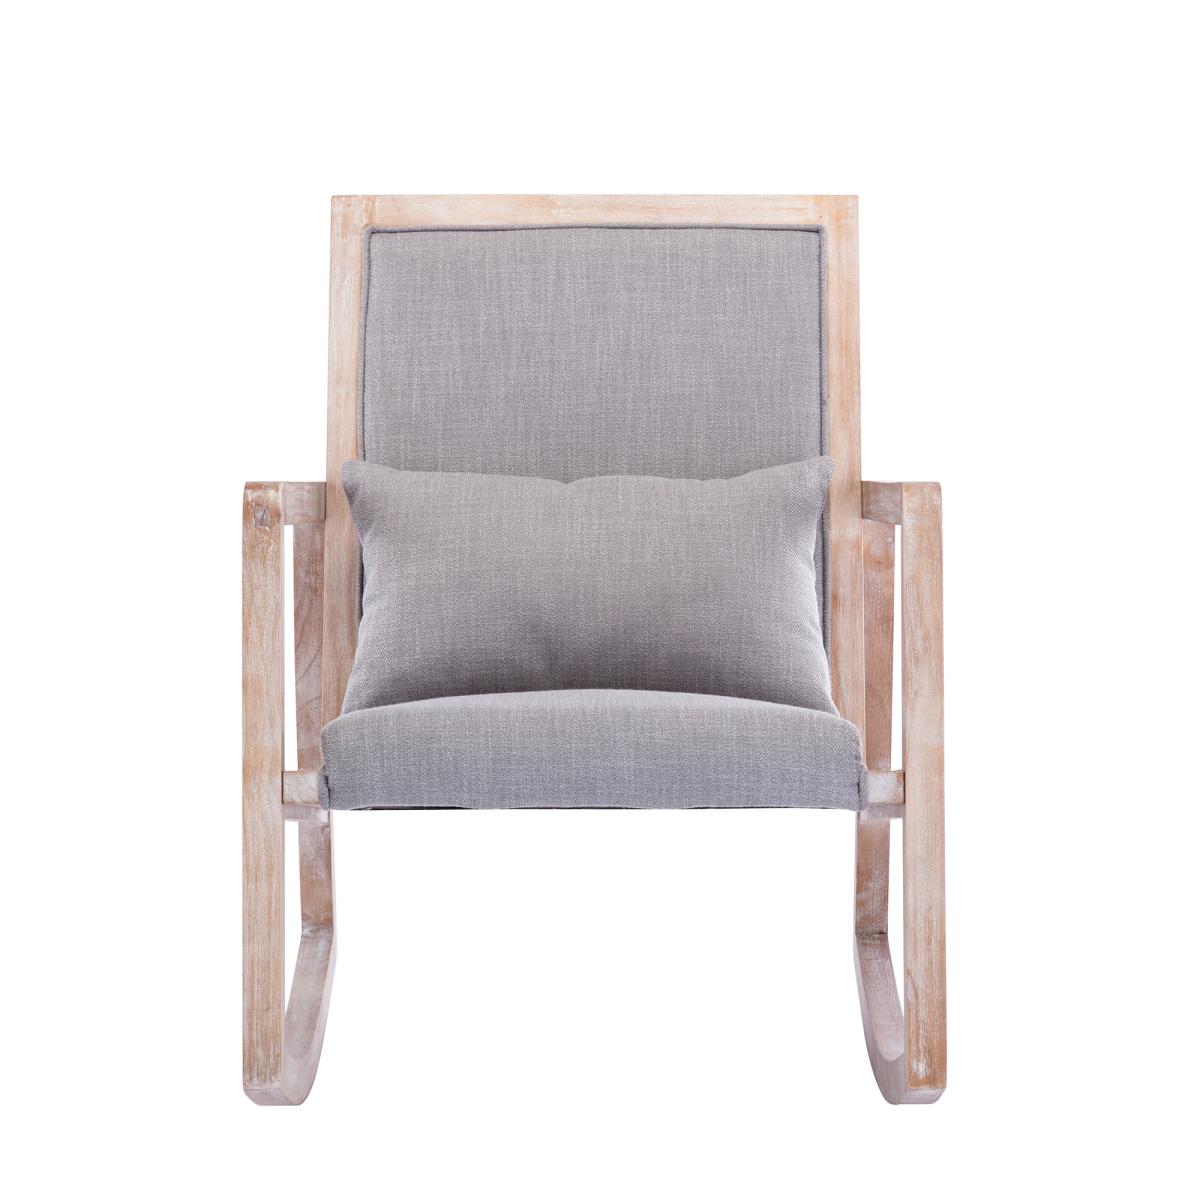 Solid wood linen fabric antique white wash painting rocking chair with removable lumbar pillow